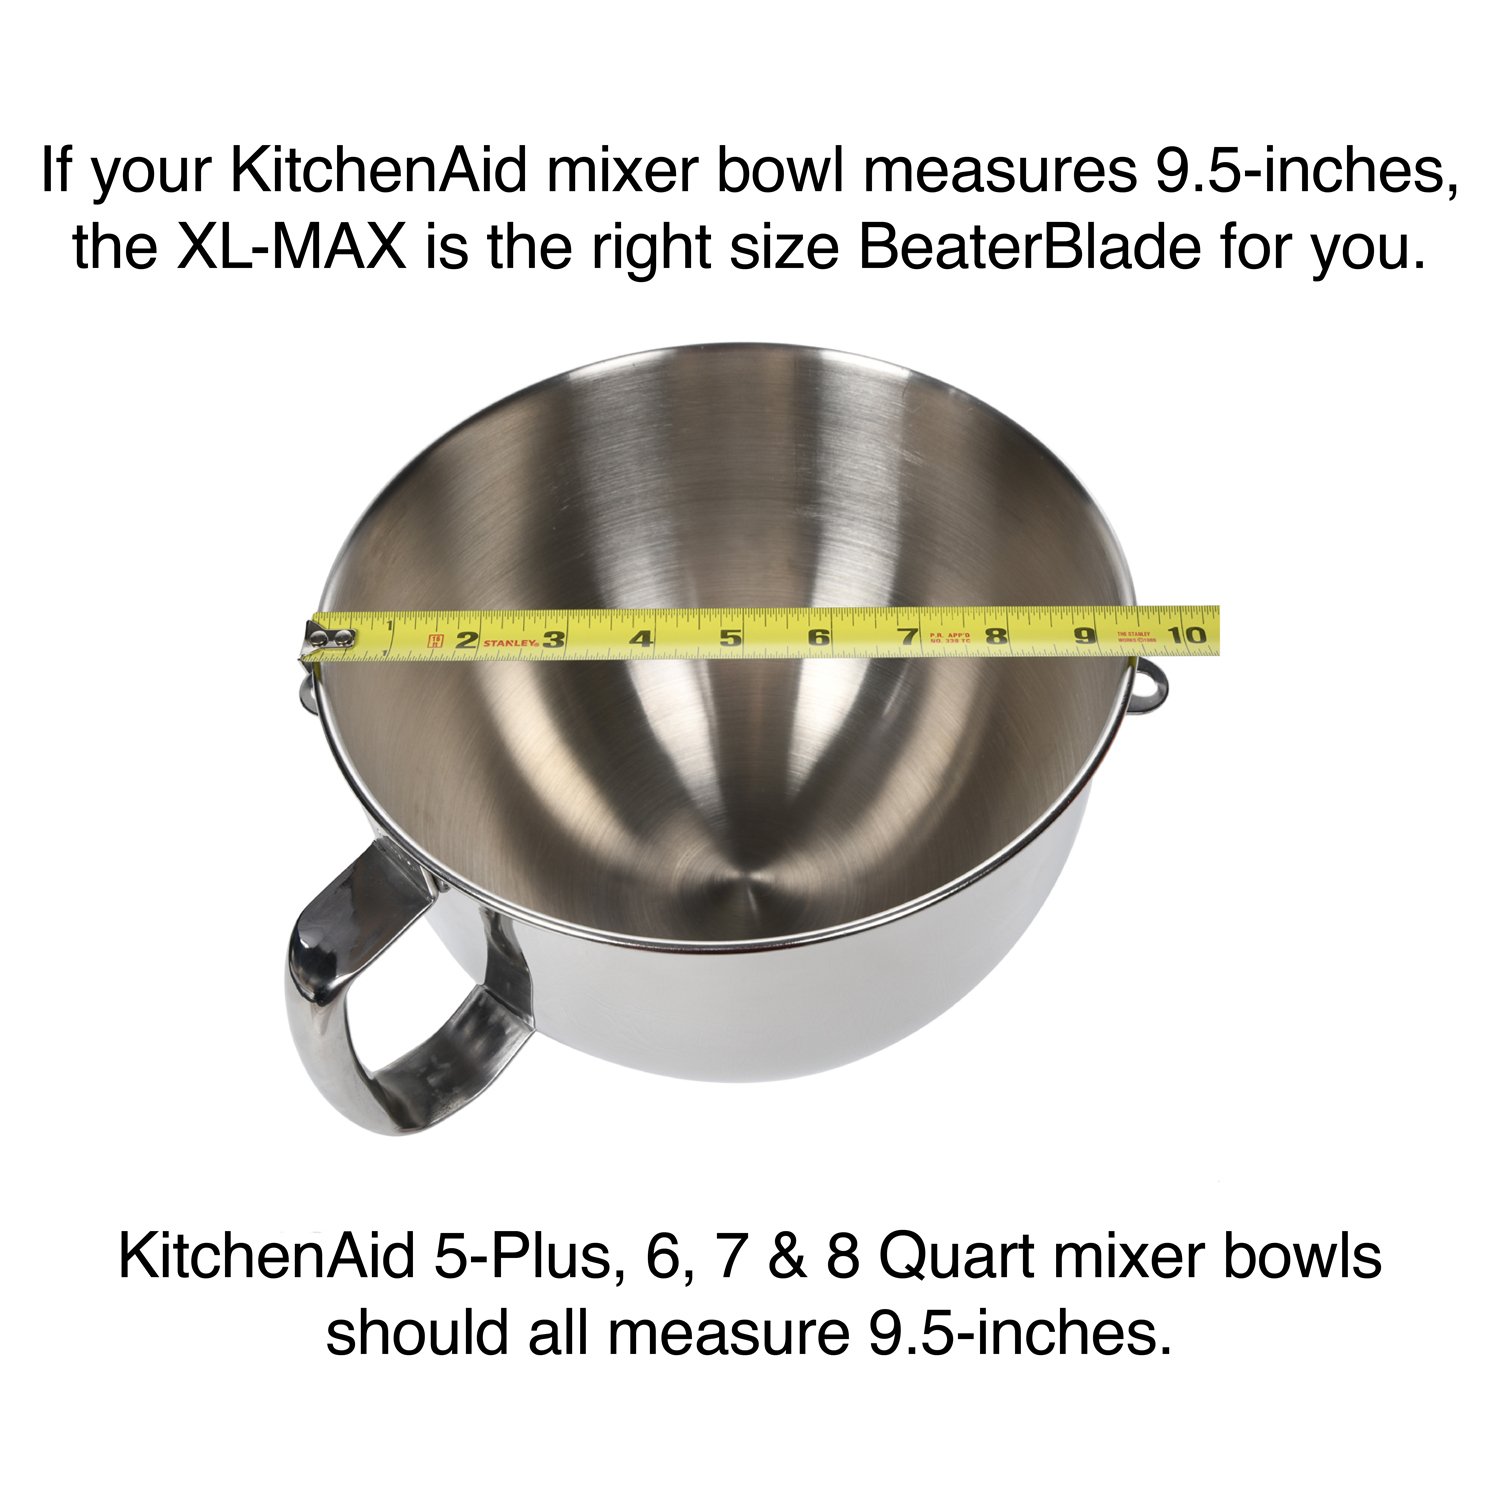 Mixing Bowls, The mixing bowl for your mixer